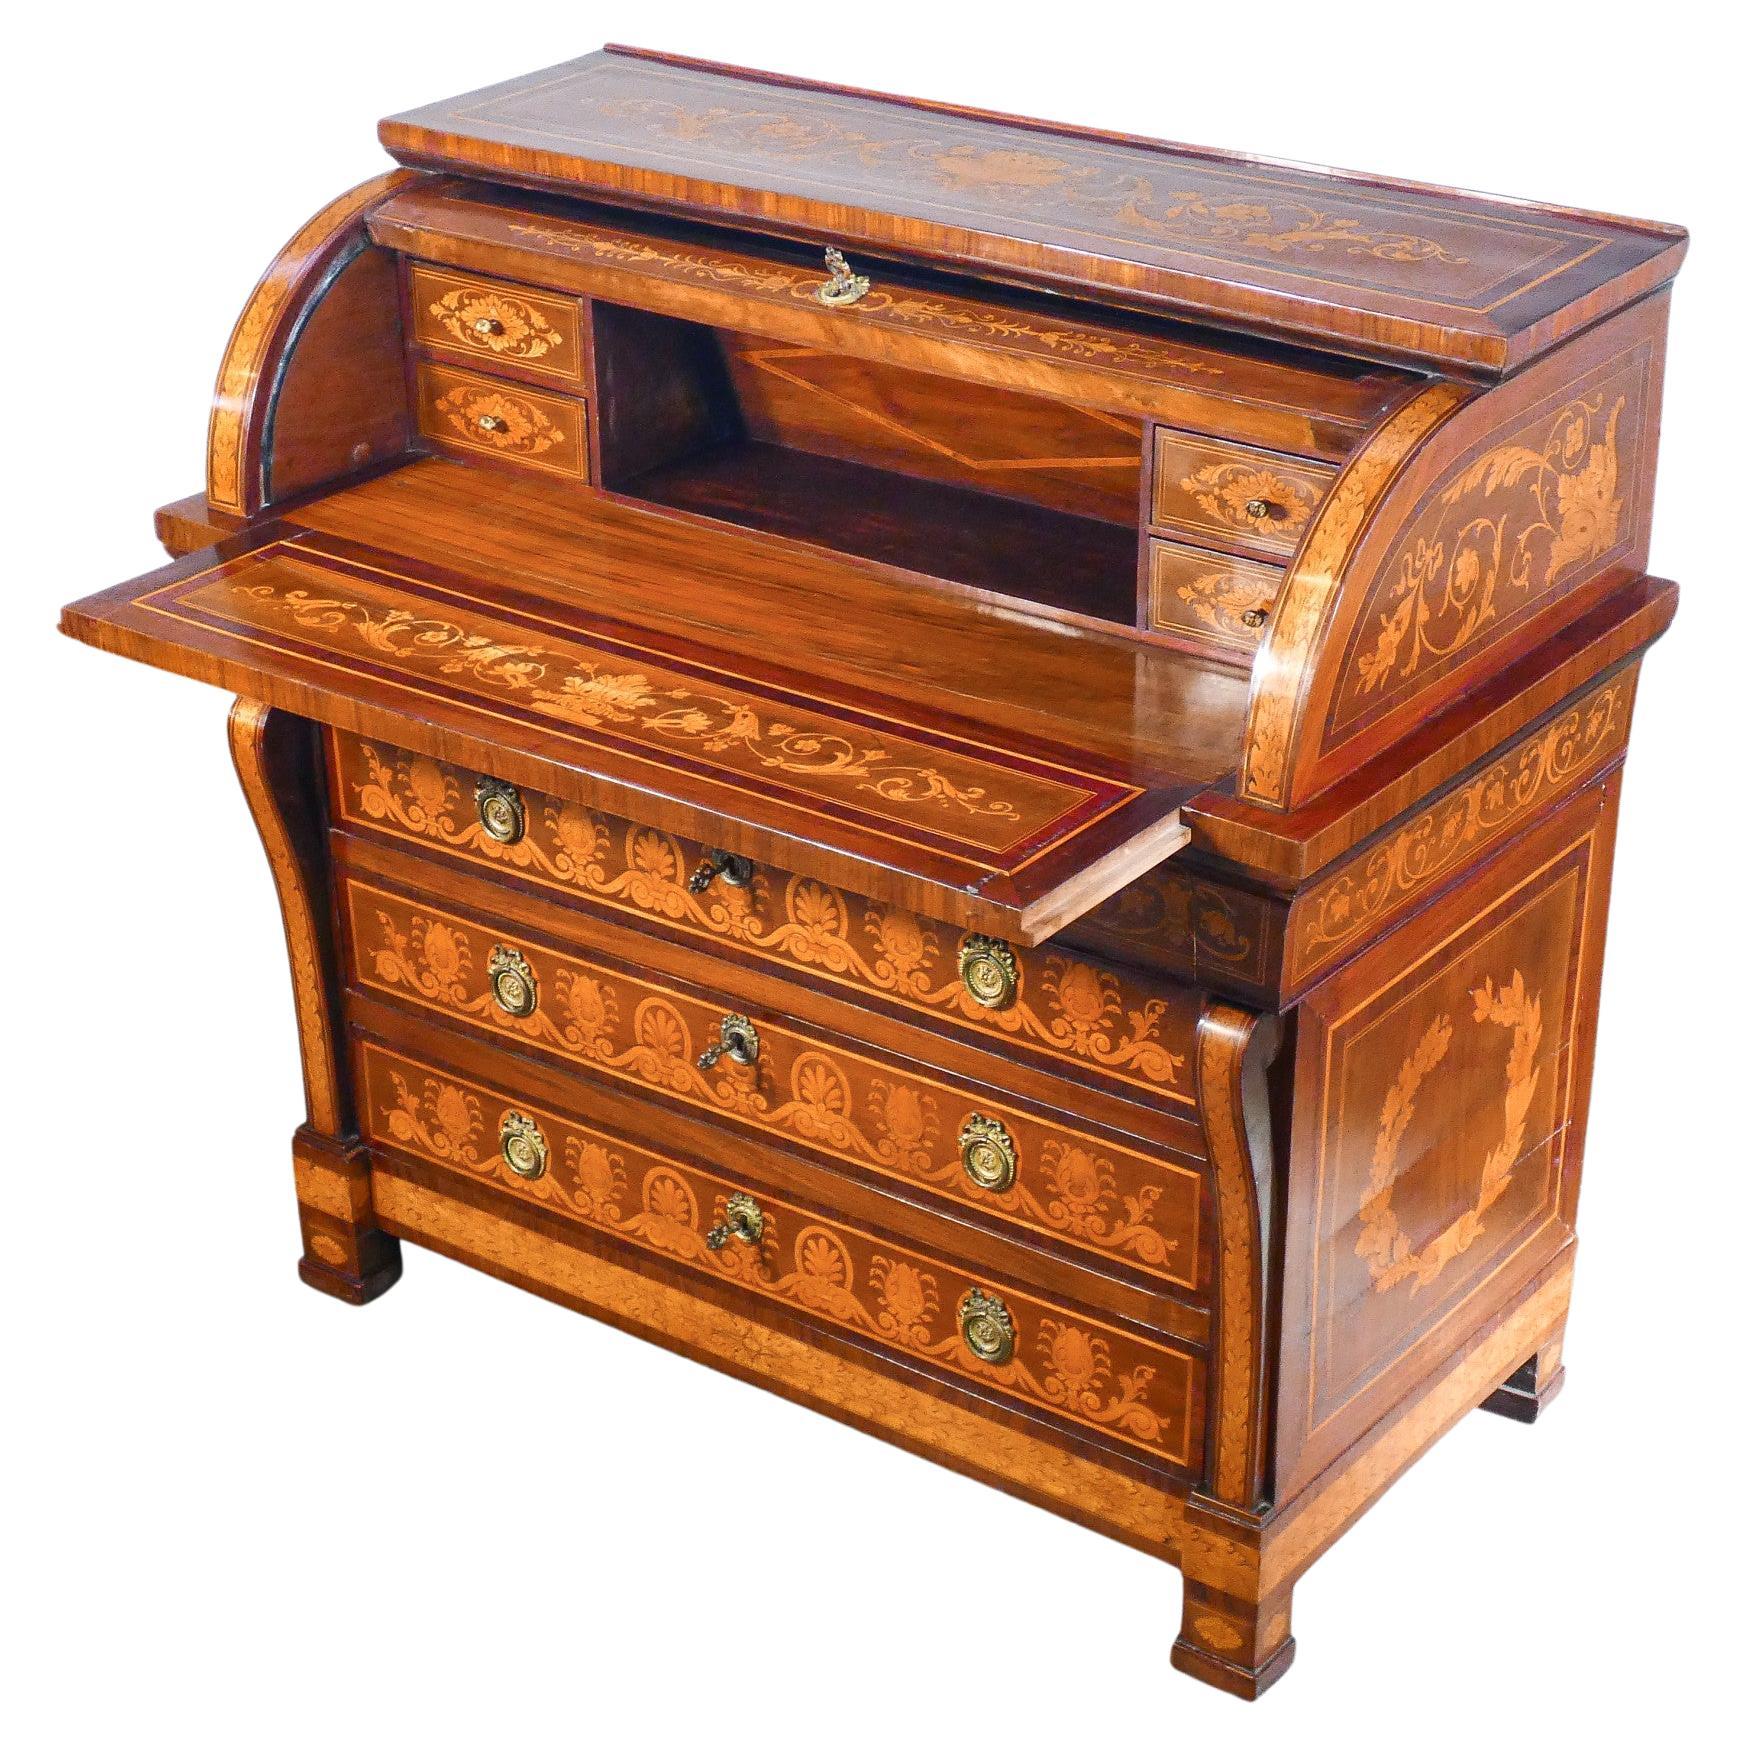 Empire Secretaire with Writing Desk, Richly Inlaid Wood. Italy Late 18th Century